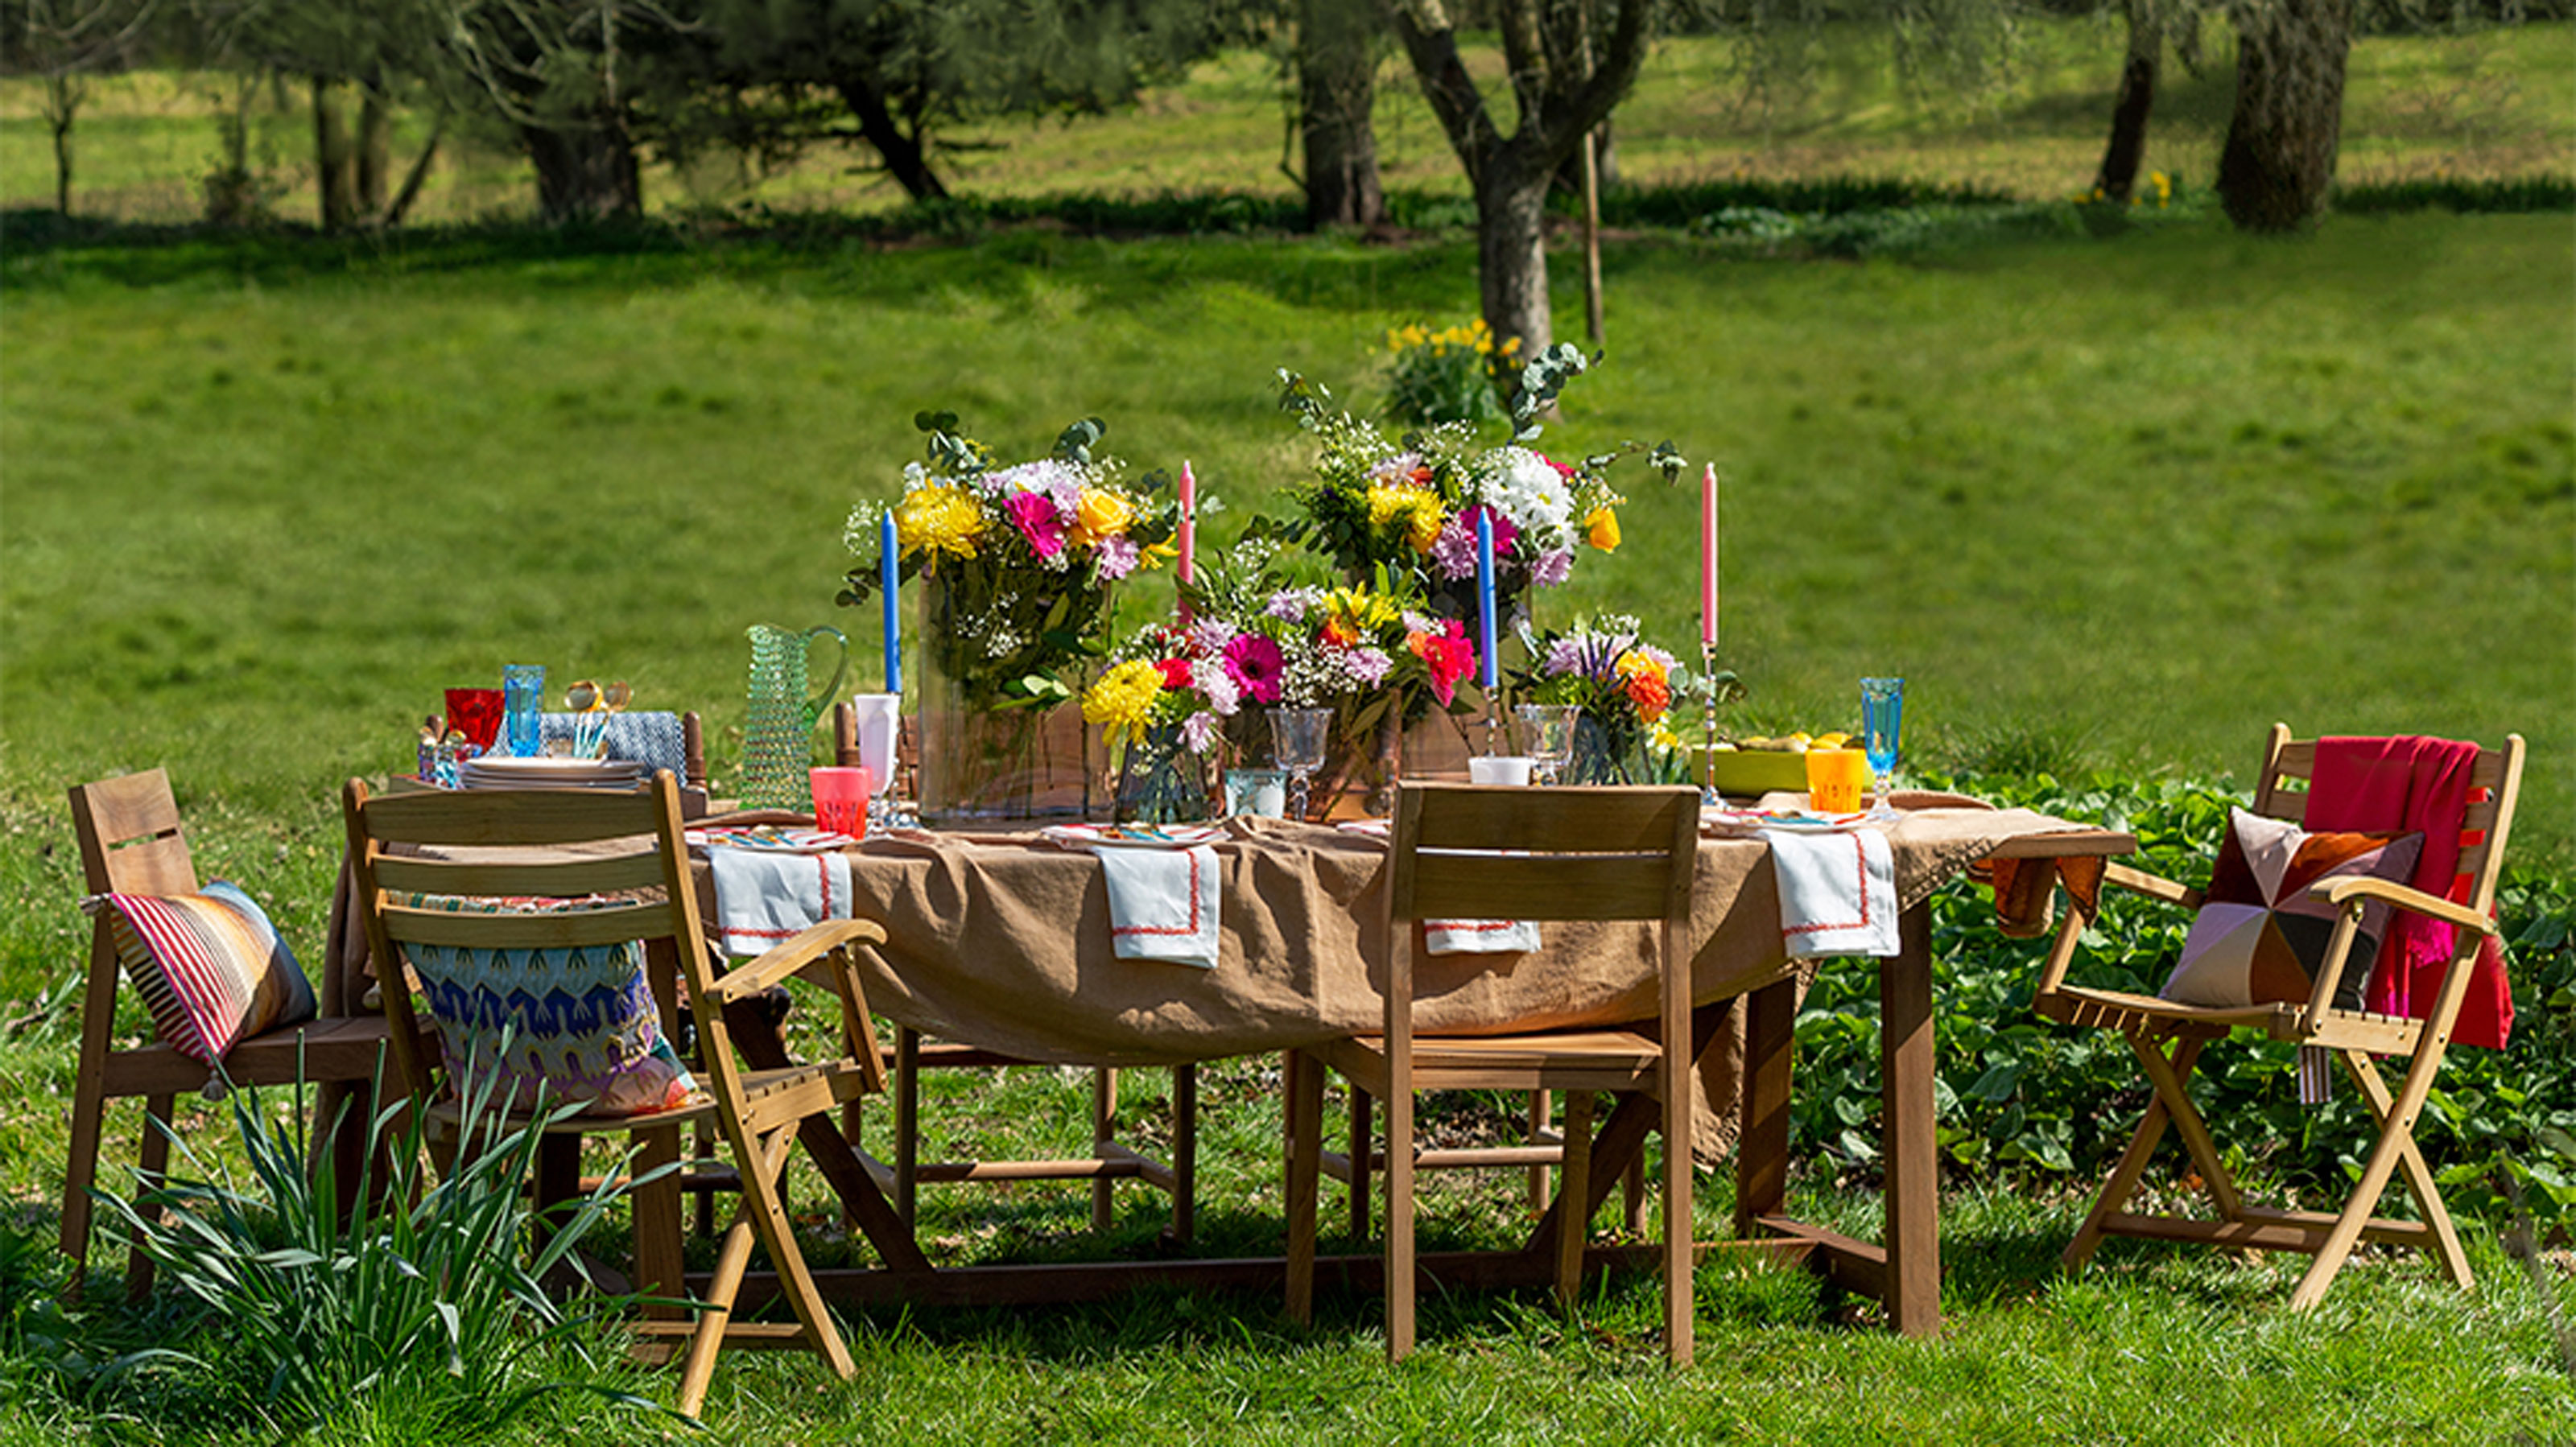 Outdoor Birthday Party Ideas 13 Options For Fun Festivities